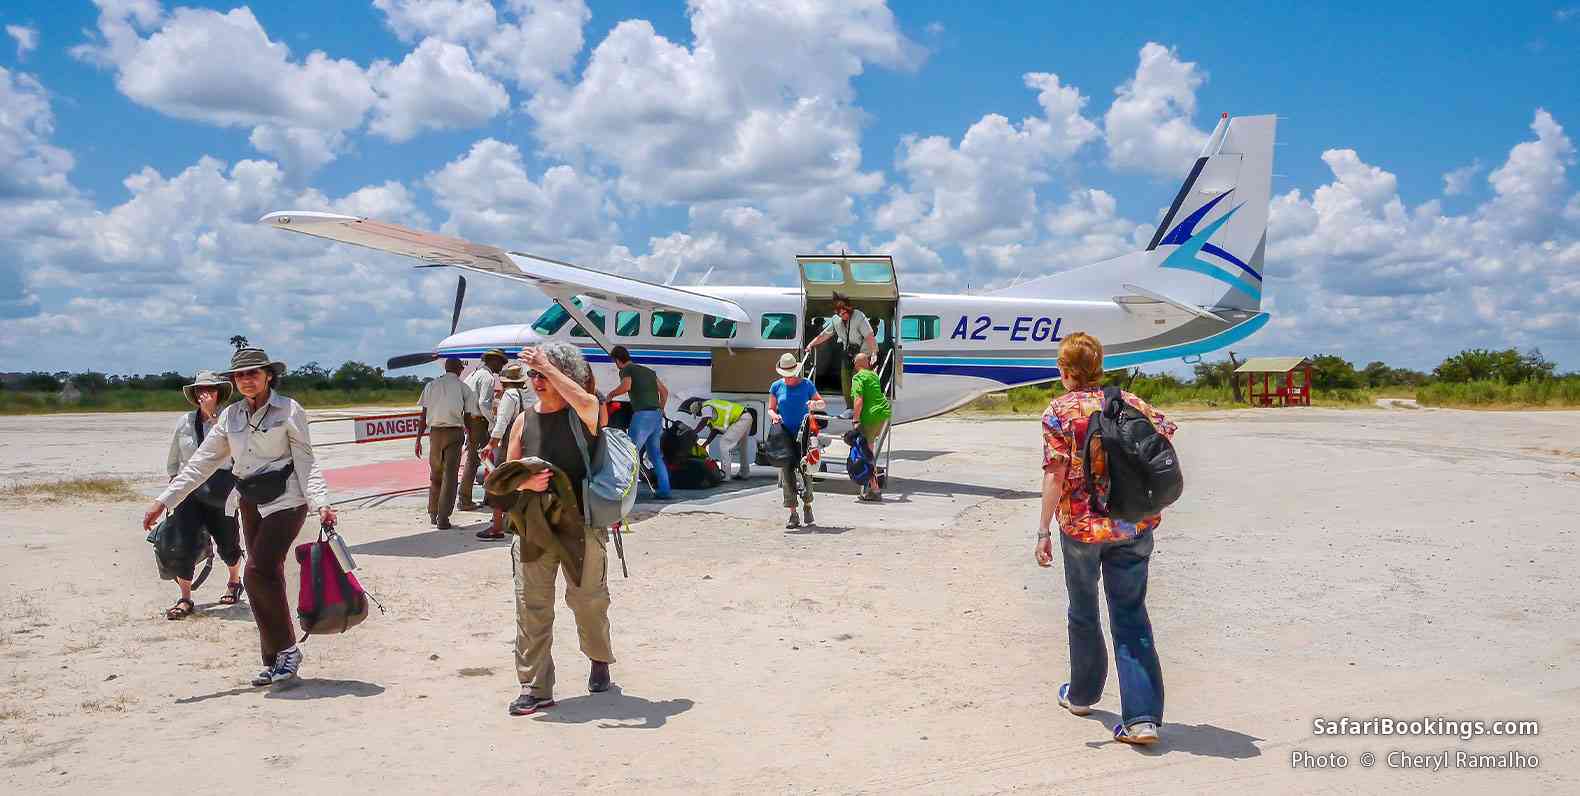 Guests arriving in the Okavango Delta by small aircraft, Botswana